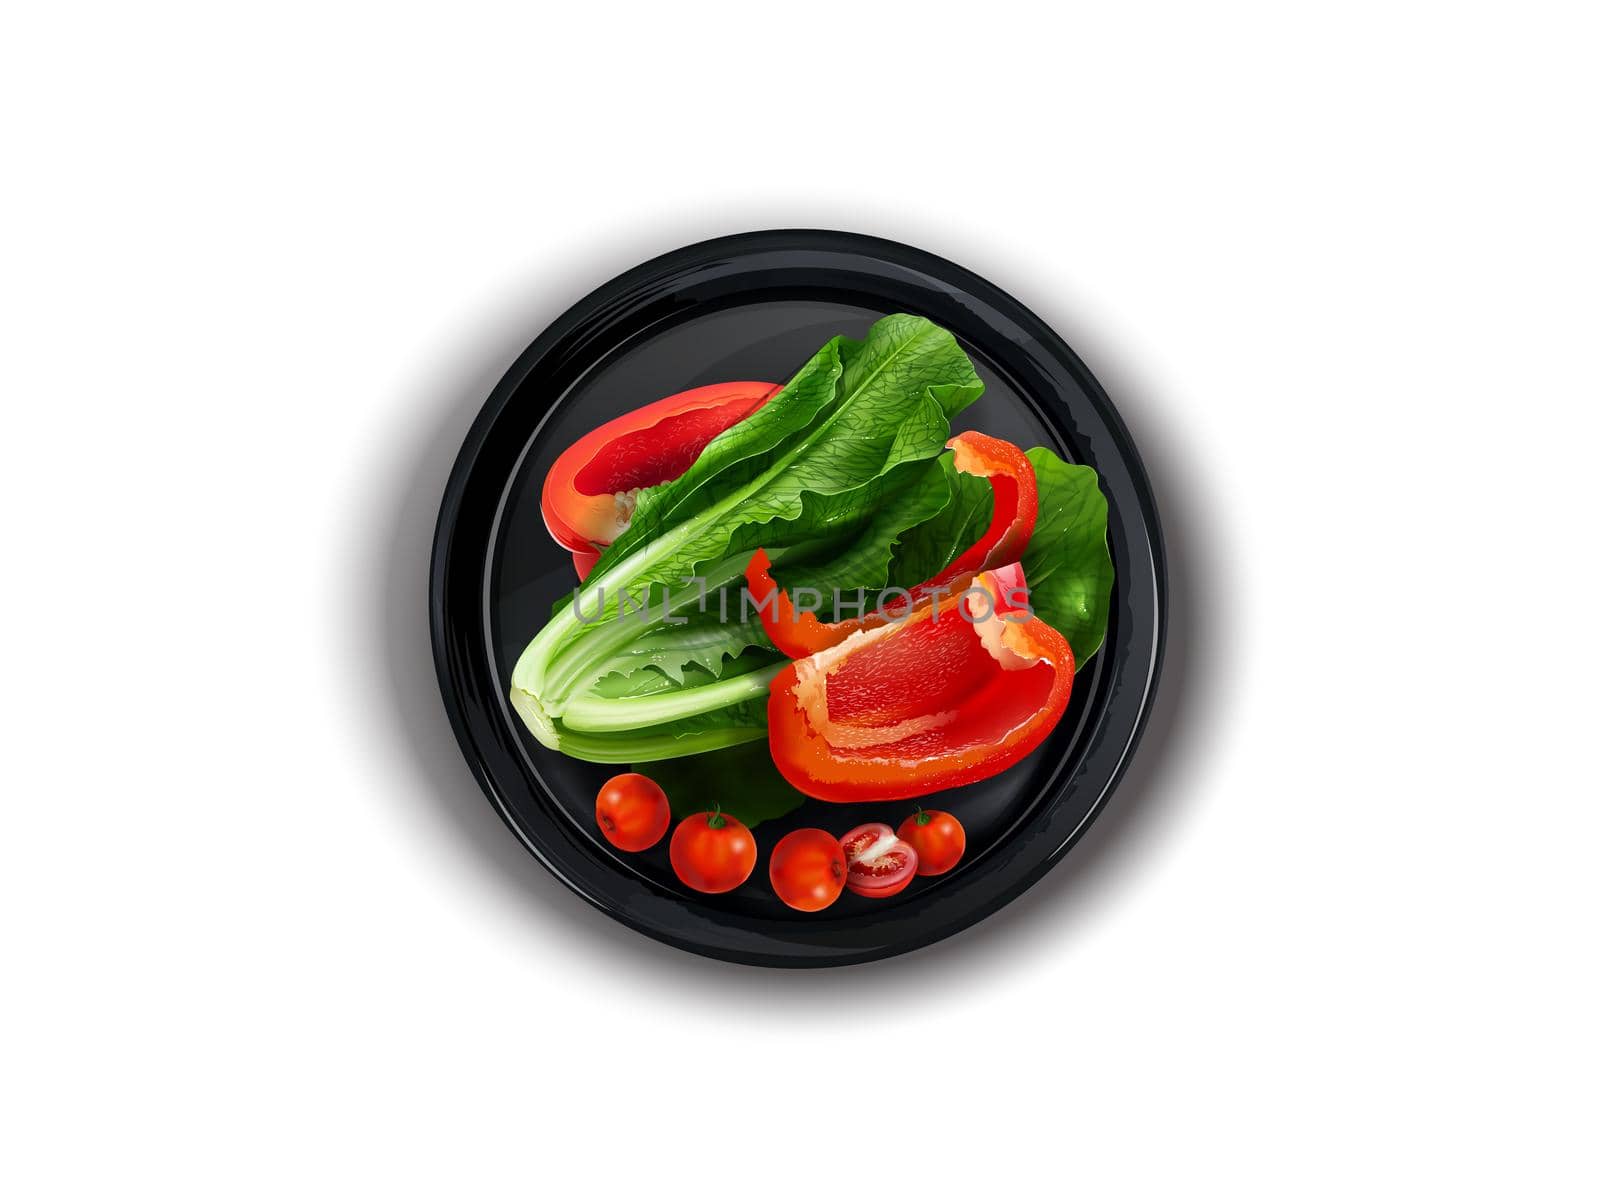 Bell pepper, lettuce and cherry tomatoes on a black plate. by ConceptCafe